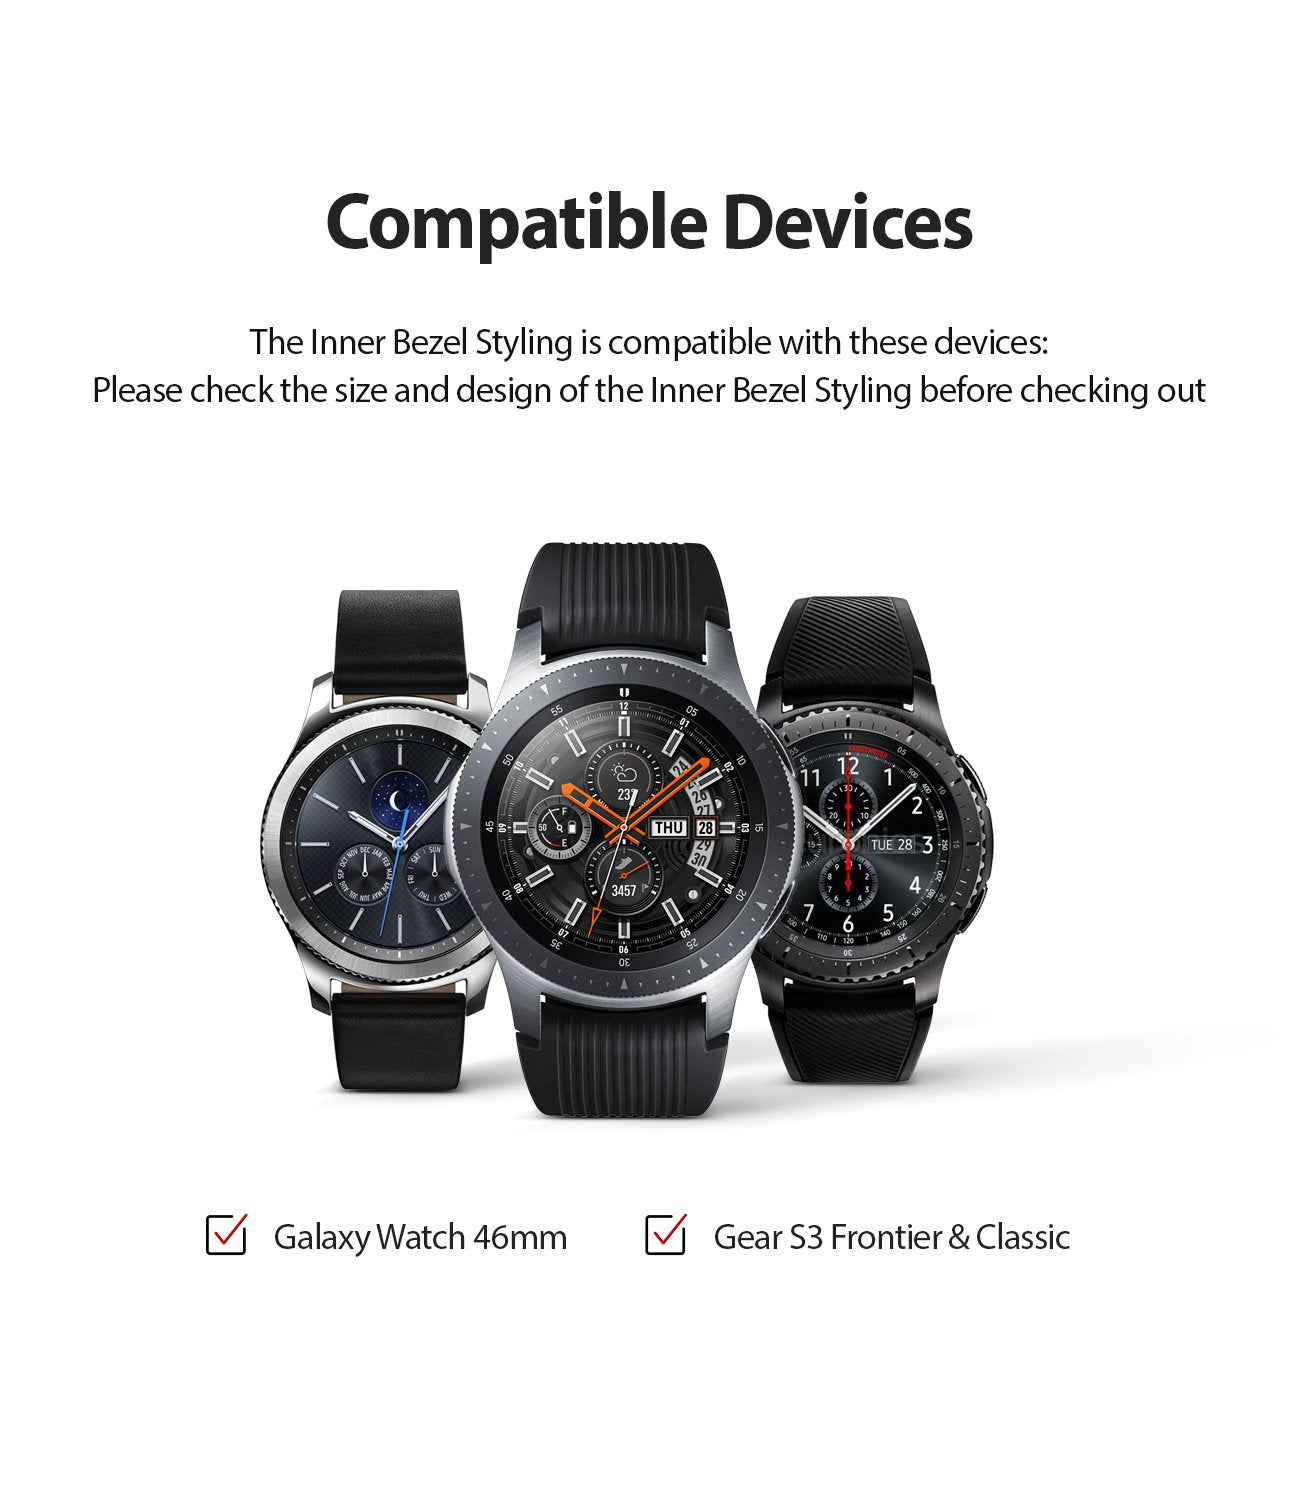 Ringke Inner Bezel Styling for Galaxy Watch 46mm, Gear S3 Frontier, and Gear S3 Classic, GW-46-IN-03, STAINLESS STEEL, compatible device